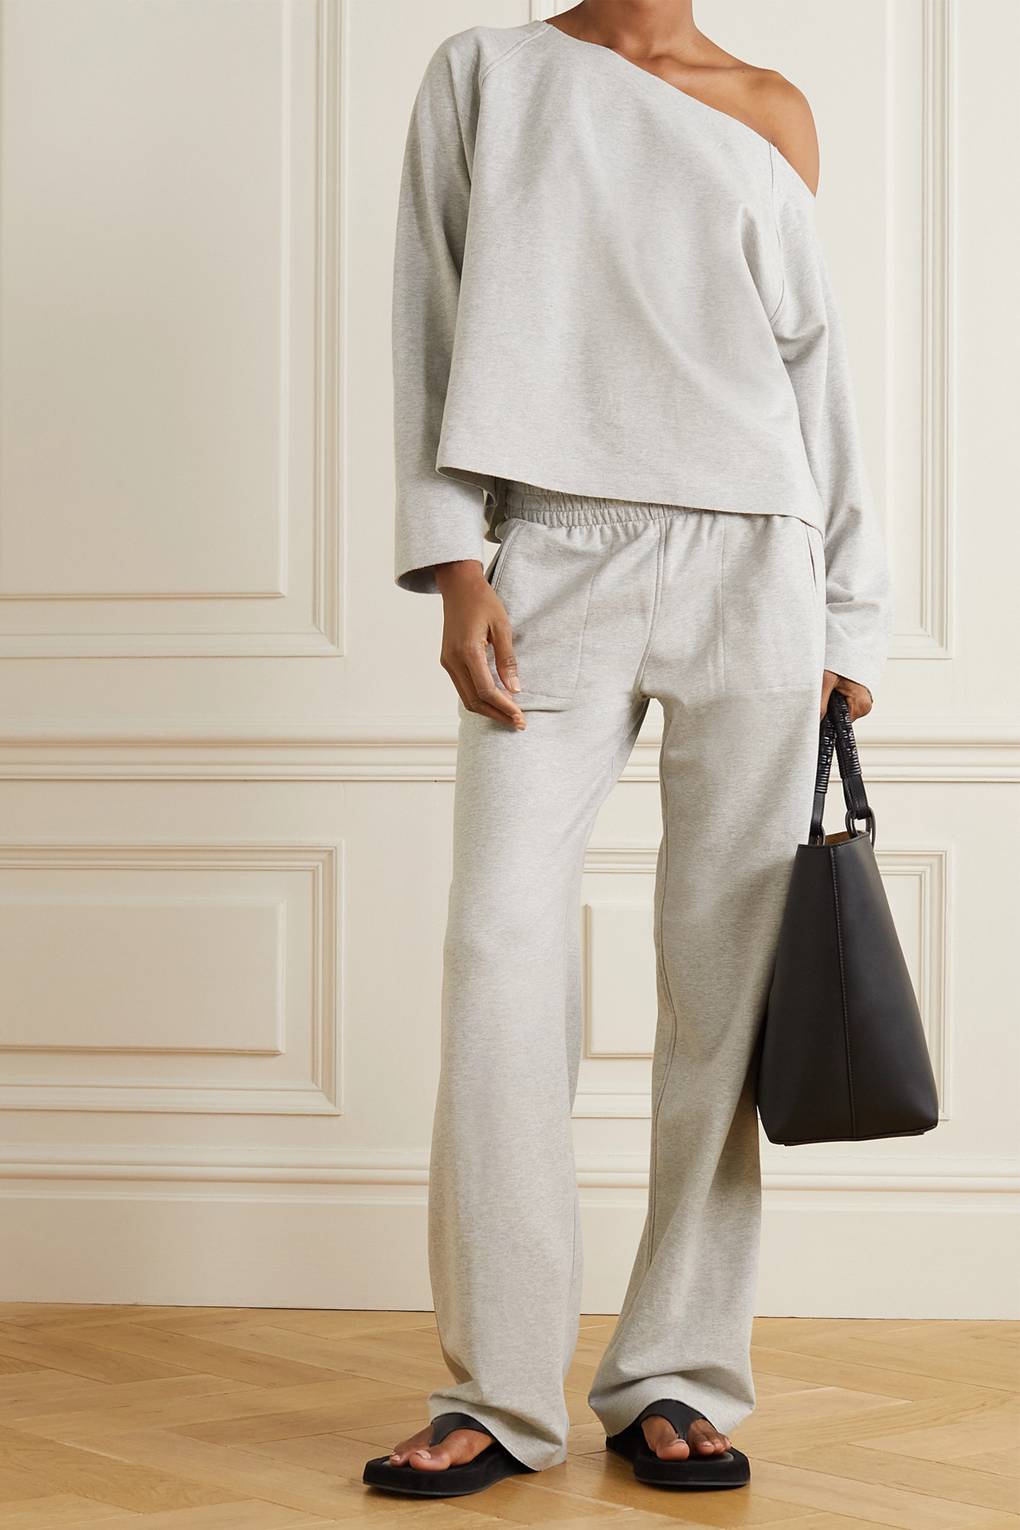 13 Best Tracksuits & Comfy Co-ords To Lounge In For Summer 2021 ...